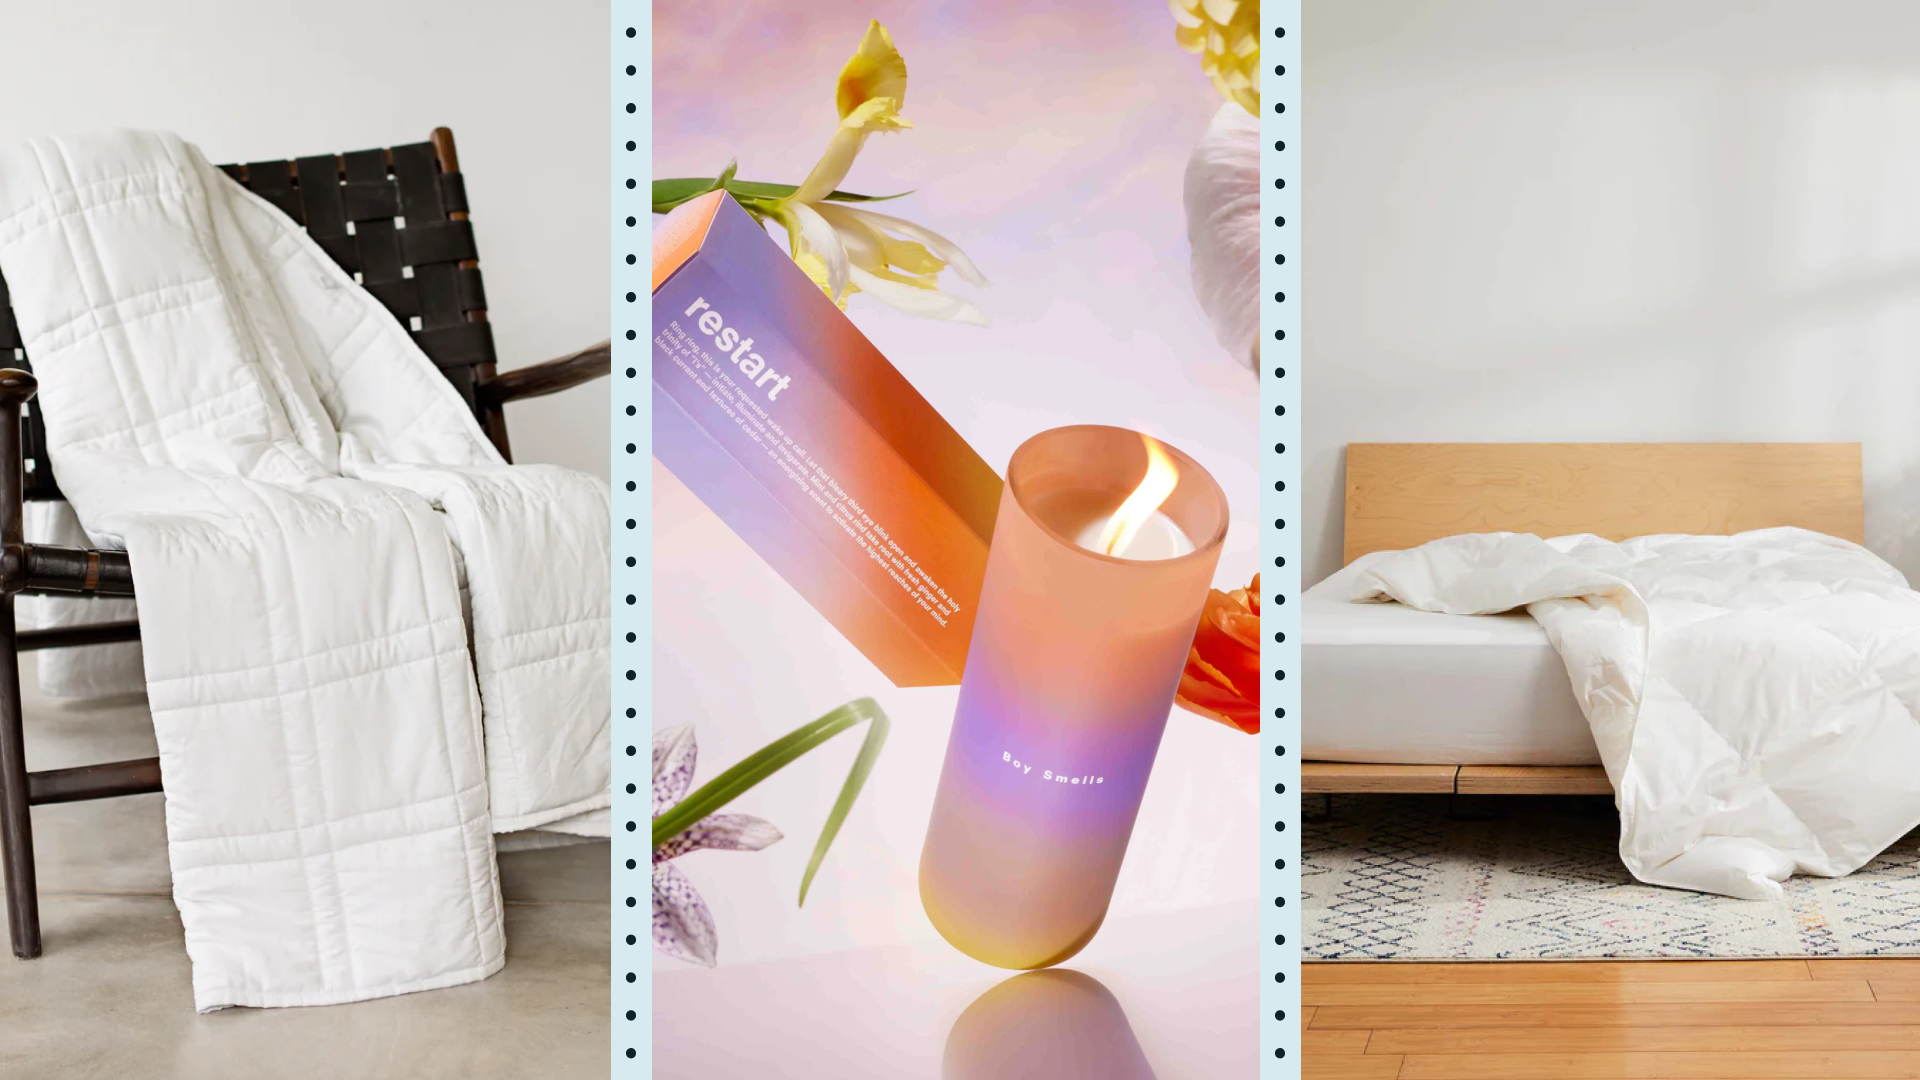 problem-solving bedroom products that'll upgrade your space